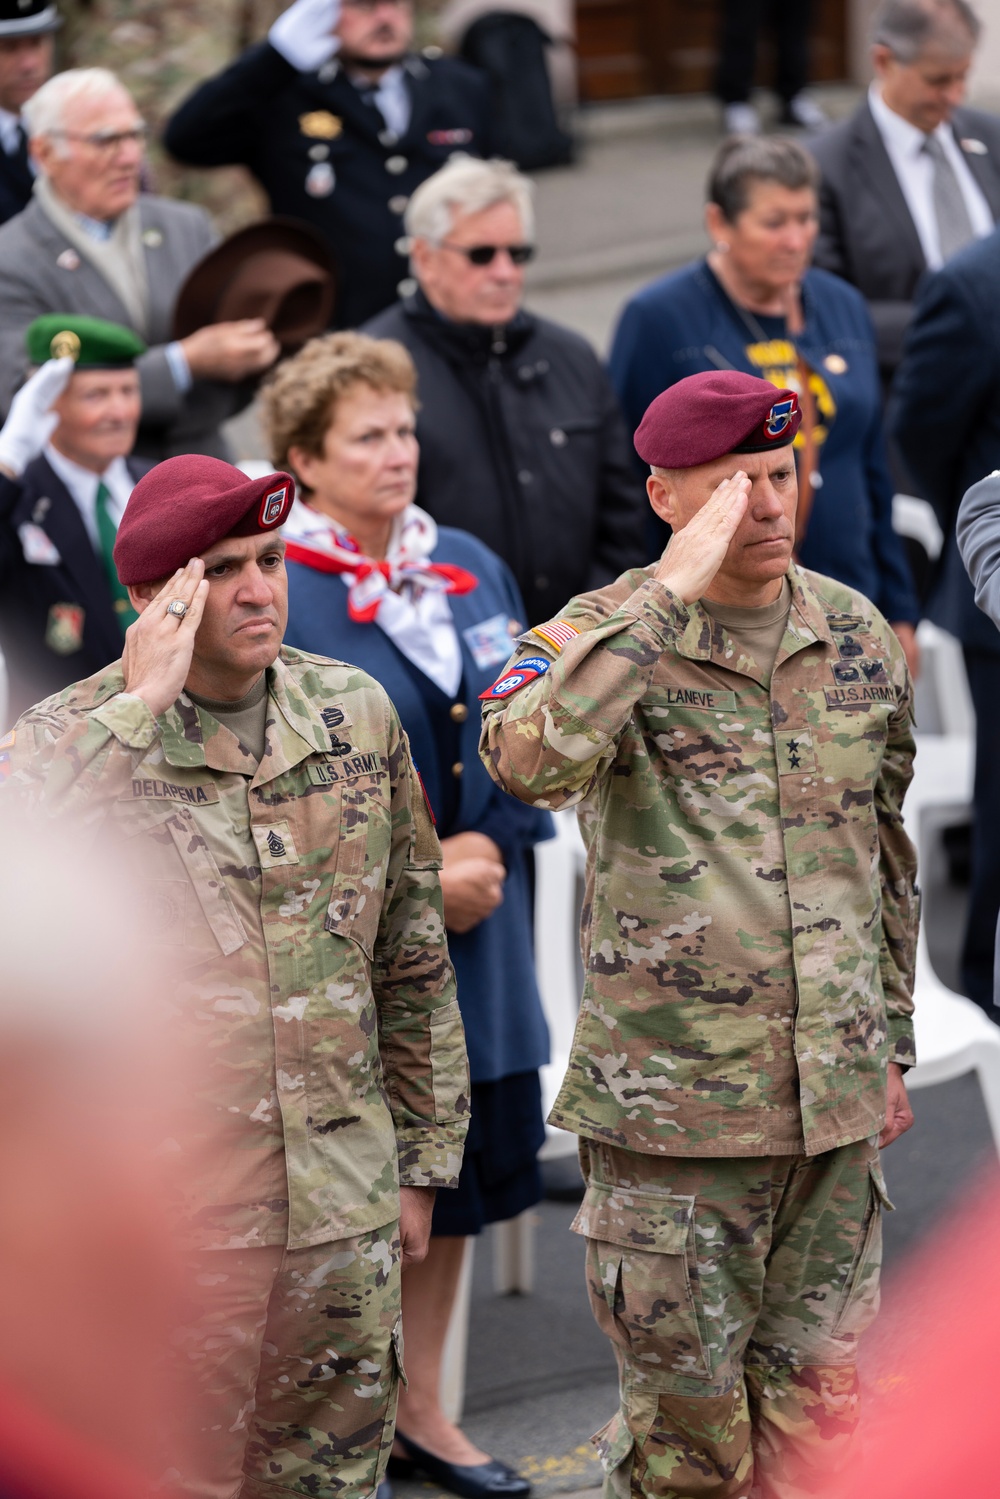 82nd Airborne Division Supports Cérémonie Monument Borne Zéro during D-Day 79